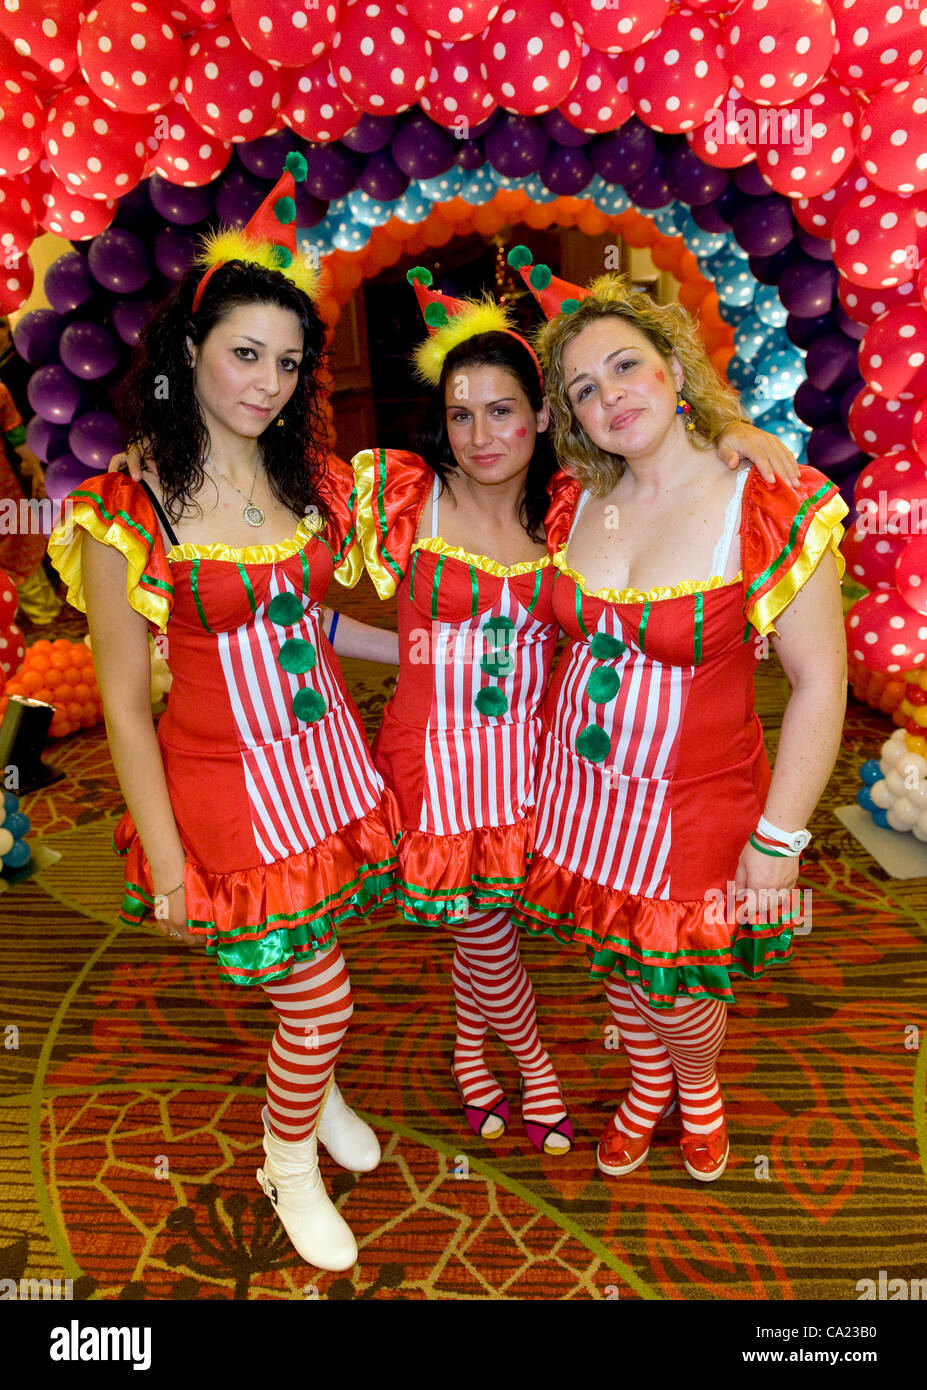 March 22, 2012 - Dallas, Texas, USA -   Balloon artists attend the circus-themed costume party during the biennial World Balloon Convention at the Sheraton Dallas Hotel.  Attended by approximately 700 balloon artistry delegates and competitors from 46 countries, the WBC features sculptire contests,  Stock Photo